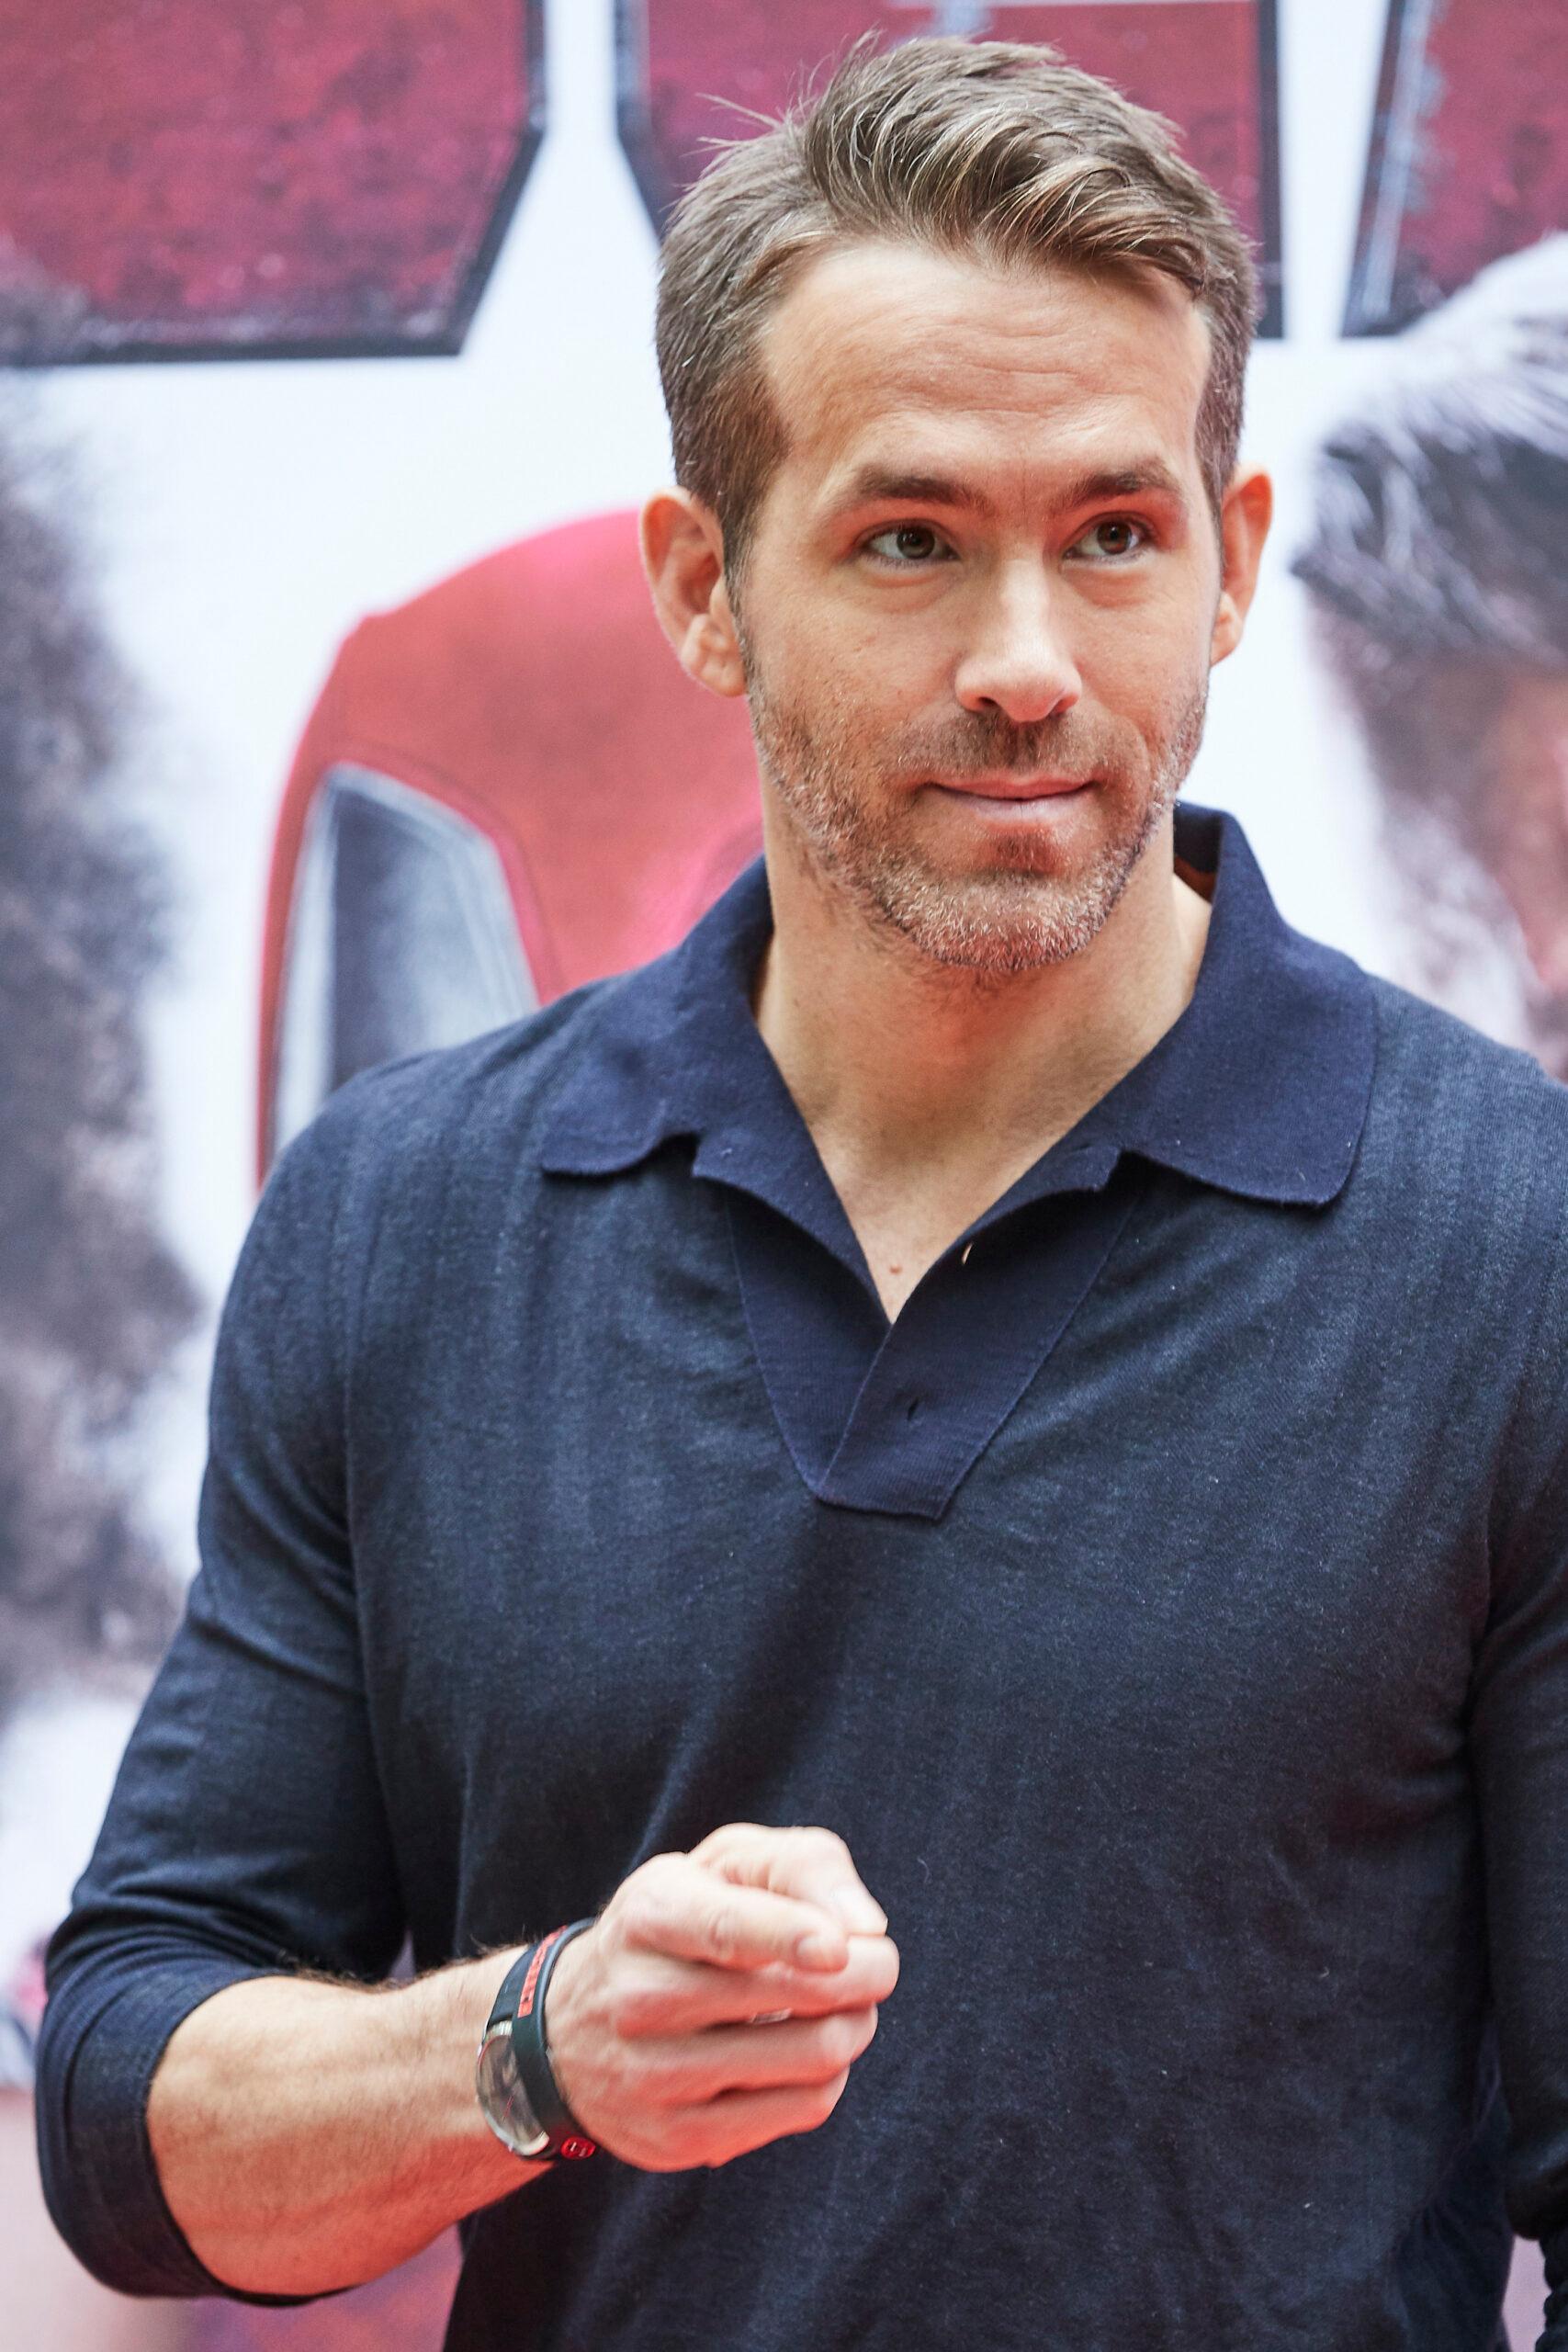 Ryan Reynolds at the 'Dead pool 2' photocall in Madrid on Monday, 6 May, 2018